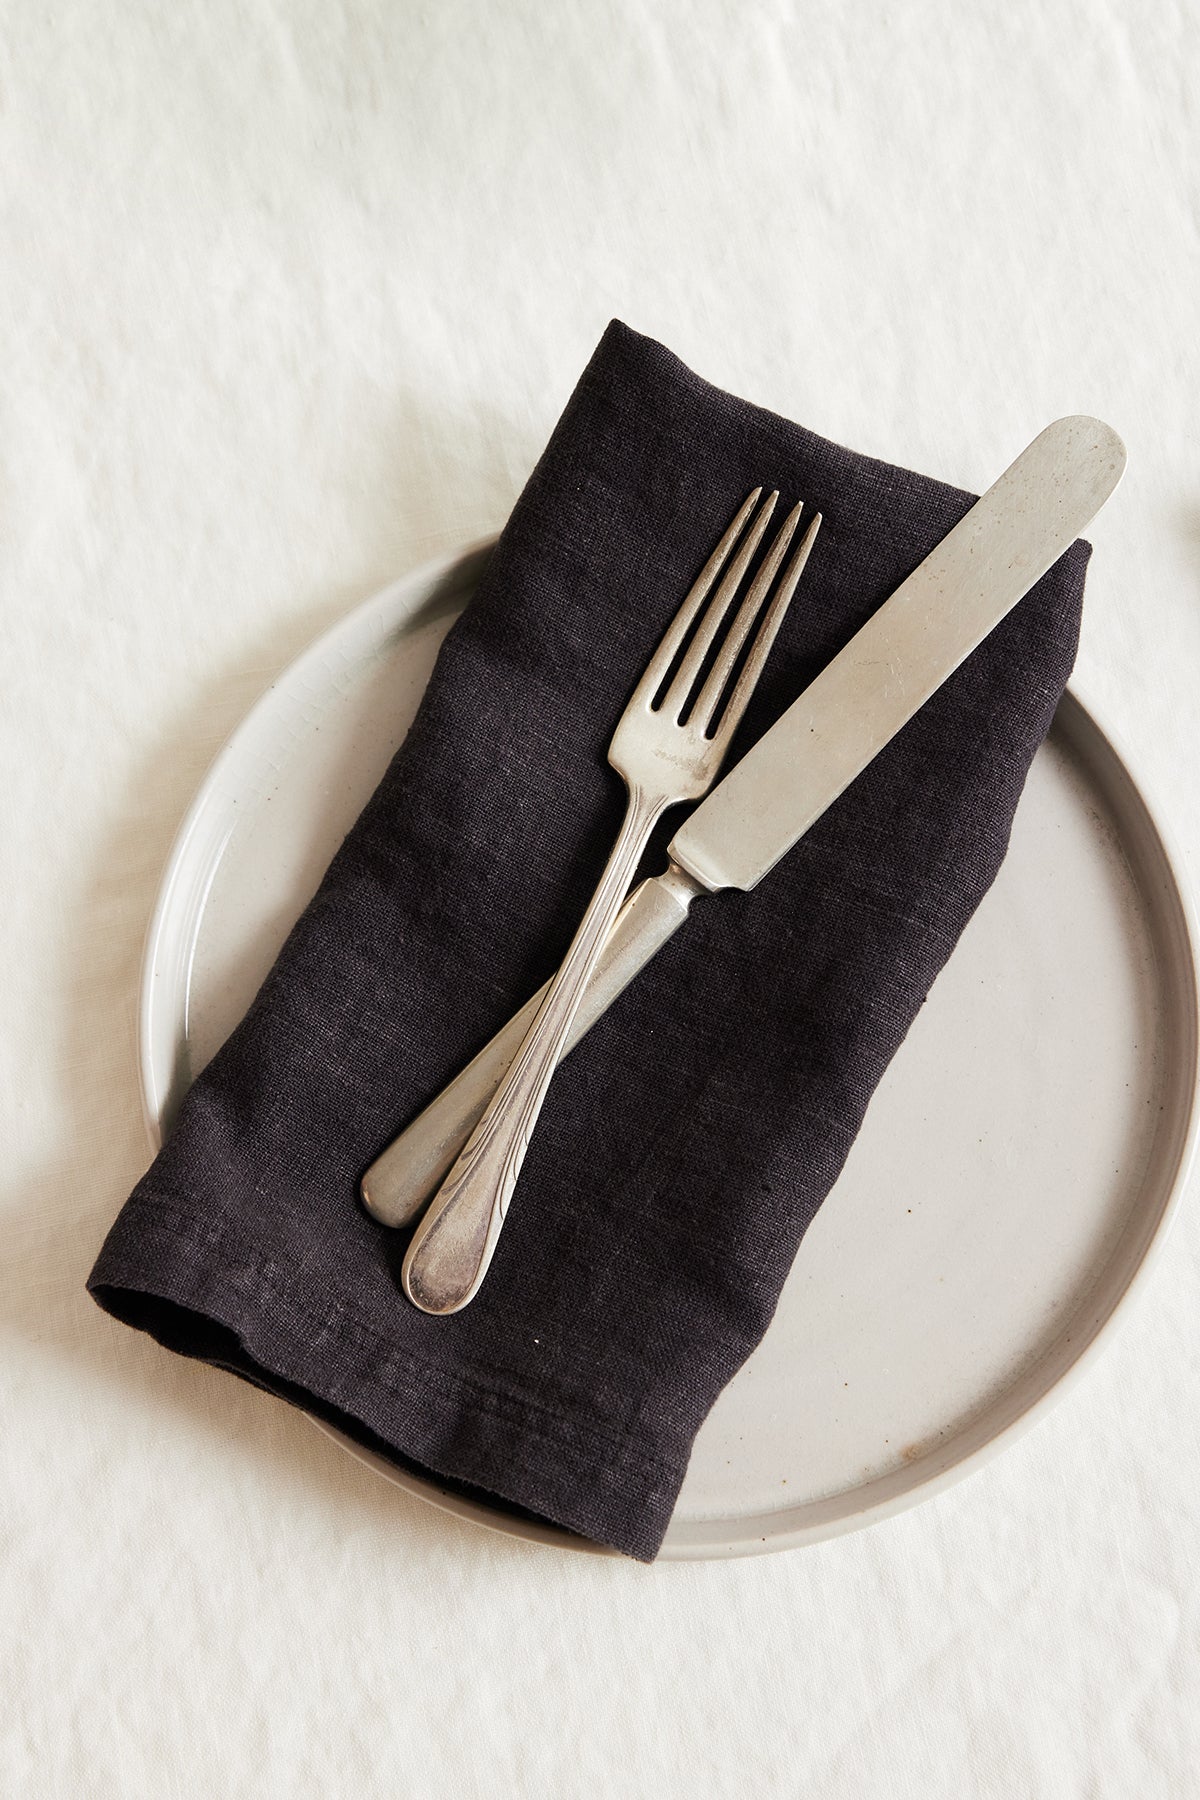 Jenny Graham Home linen napkin with fork and knife on a white plate, an everyday kitchen essential with a luxe finish.-25629296230593